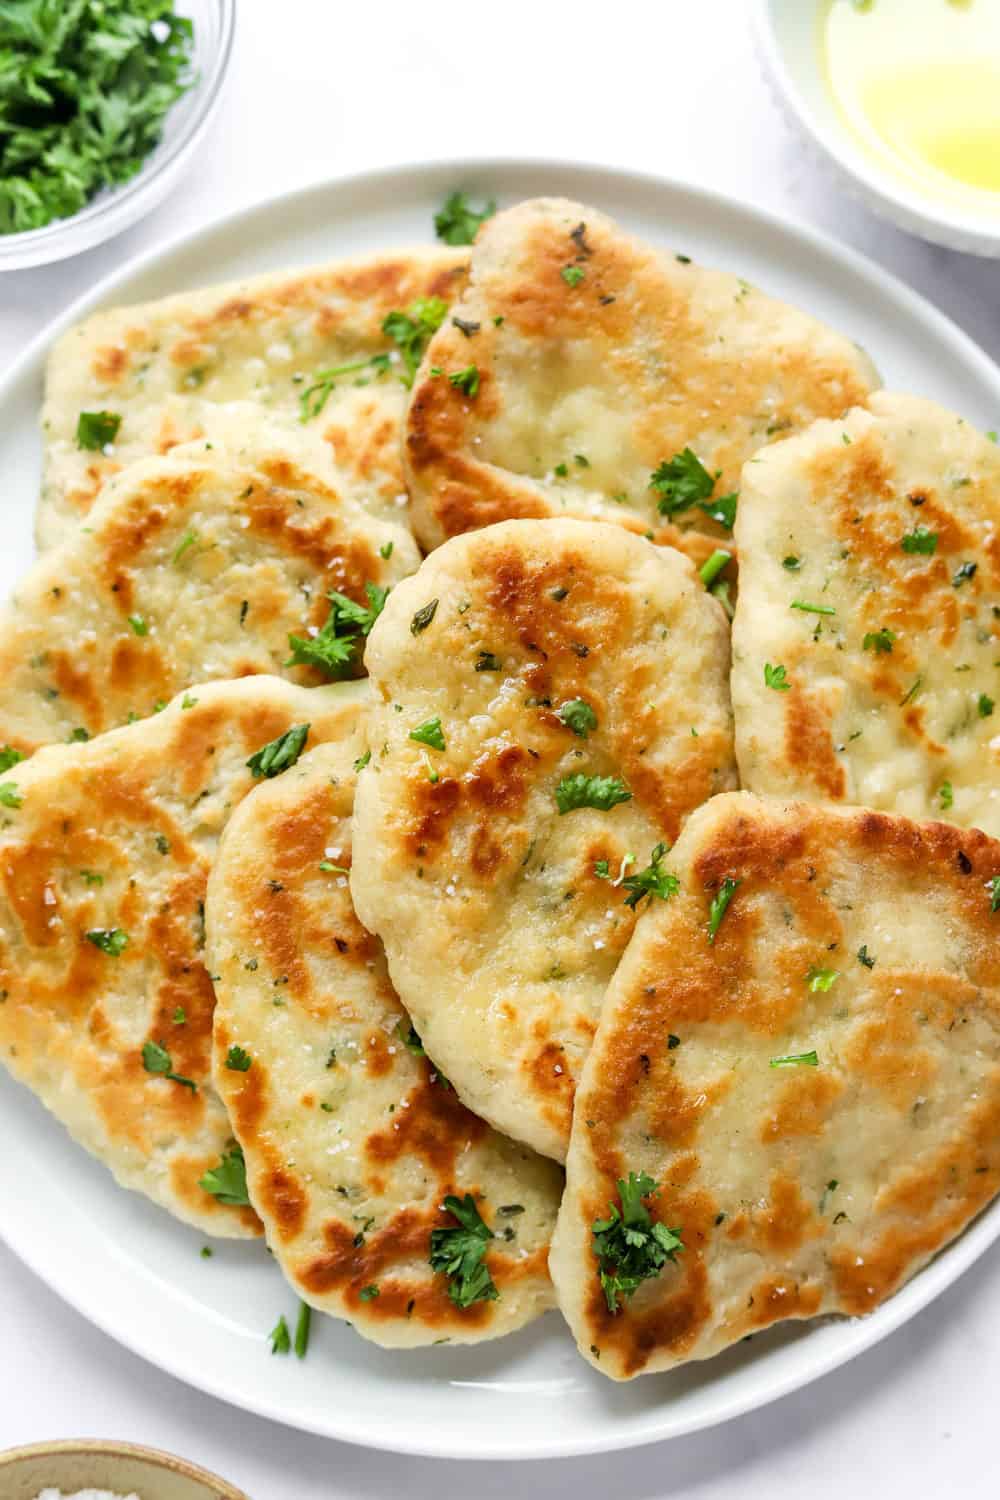 Pile of gluten free naan bread on a white plate topped with some oil and chopped parsley. 